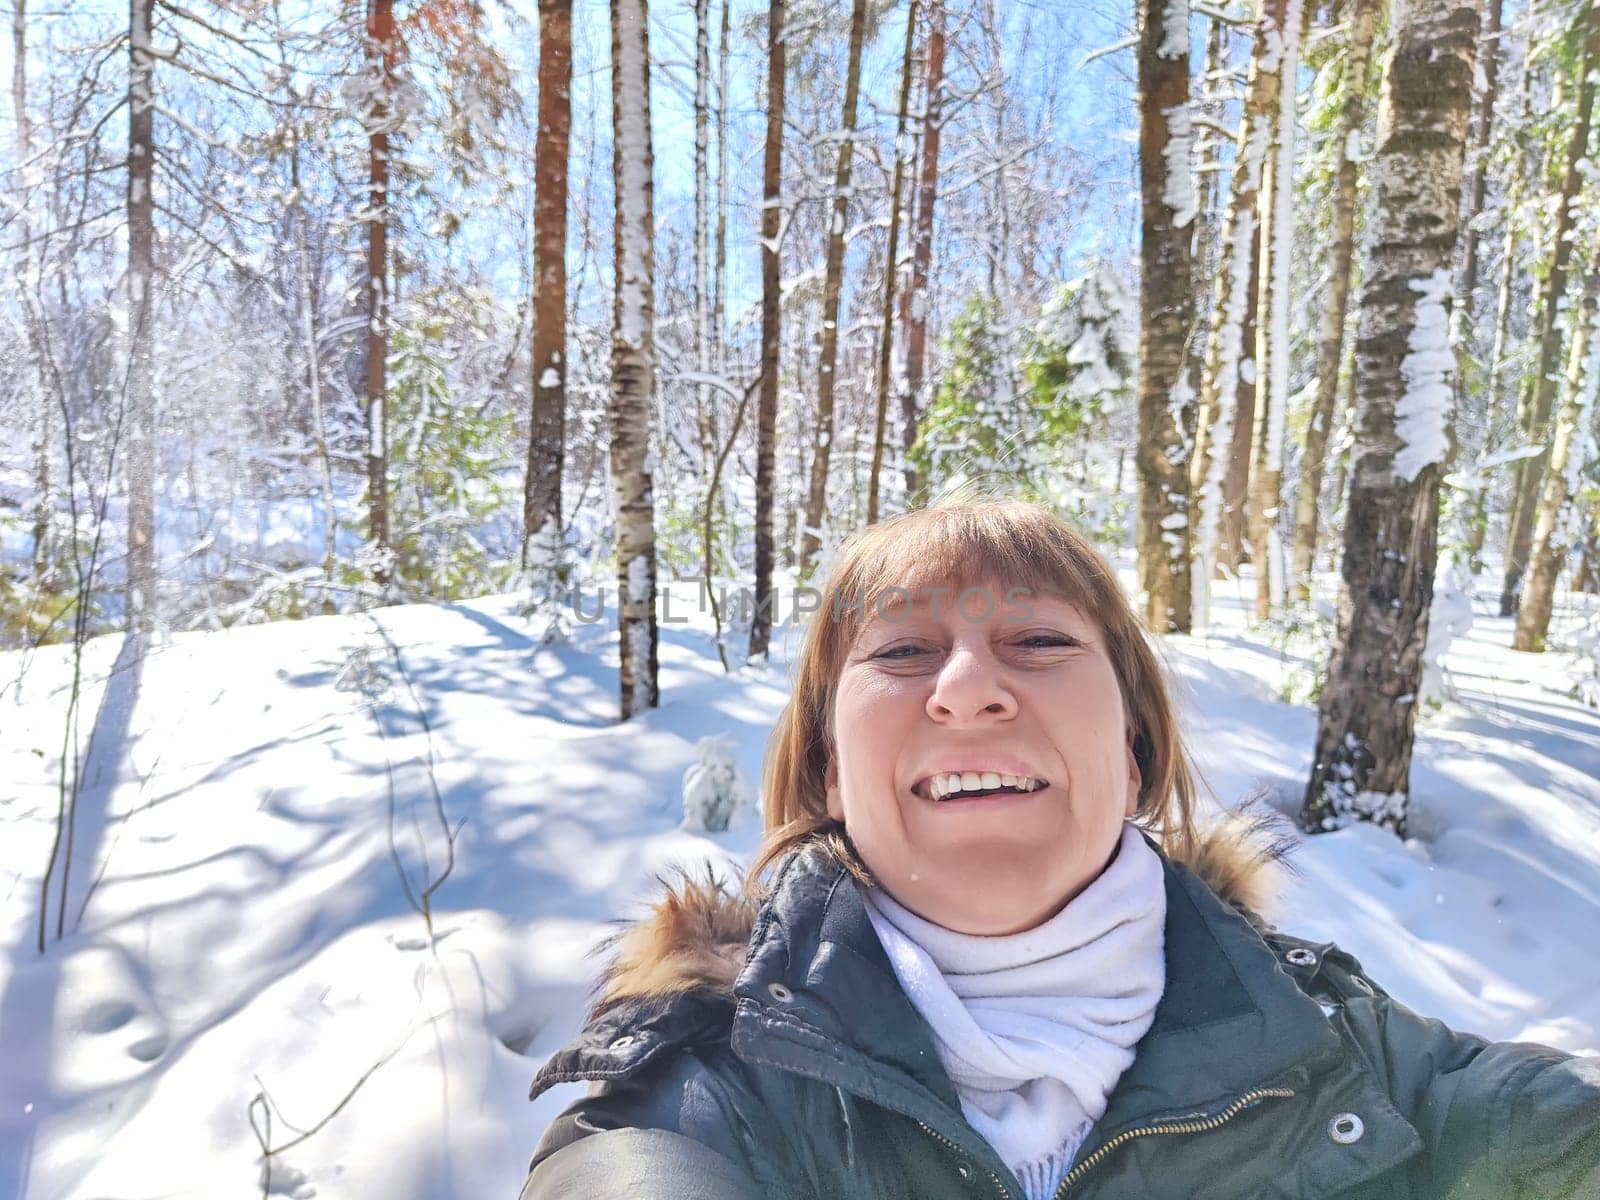 A cheerful middle aged woman in a winter coat taking selfie on nature outdoors in sunny day with blue sky